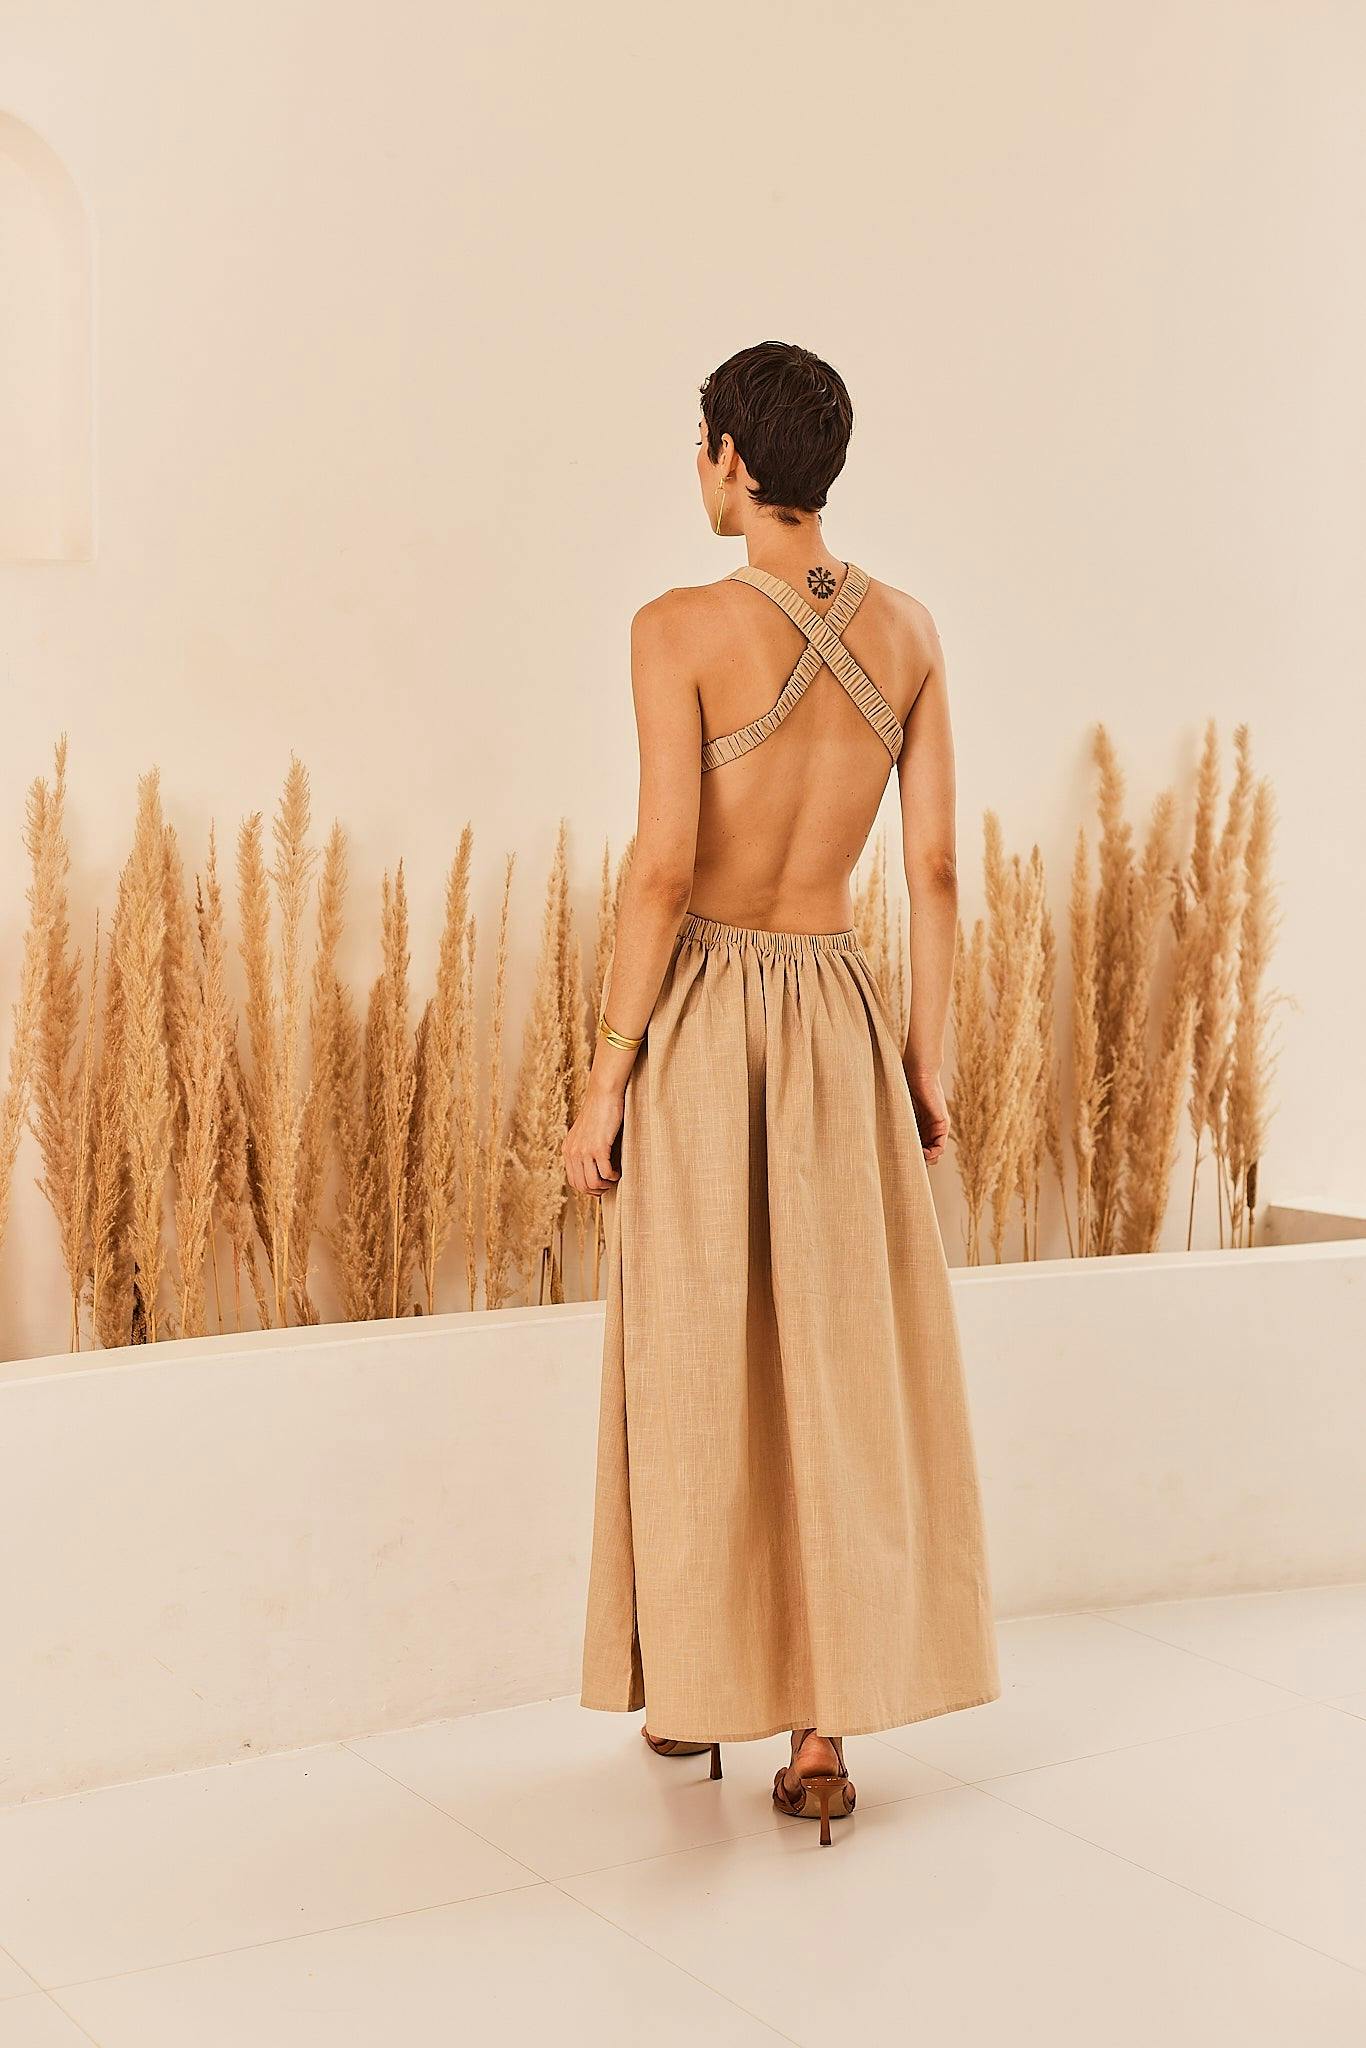 Thumbnail preview #1 for Backless Corsica Dress